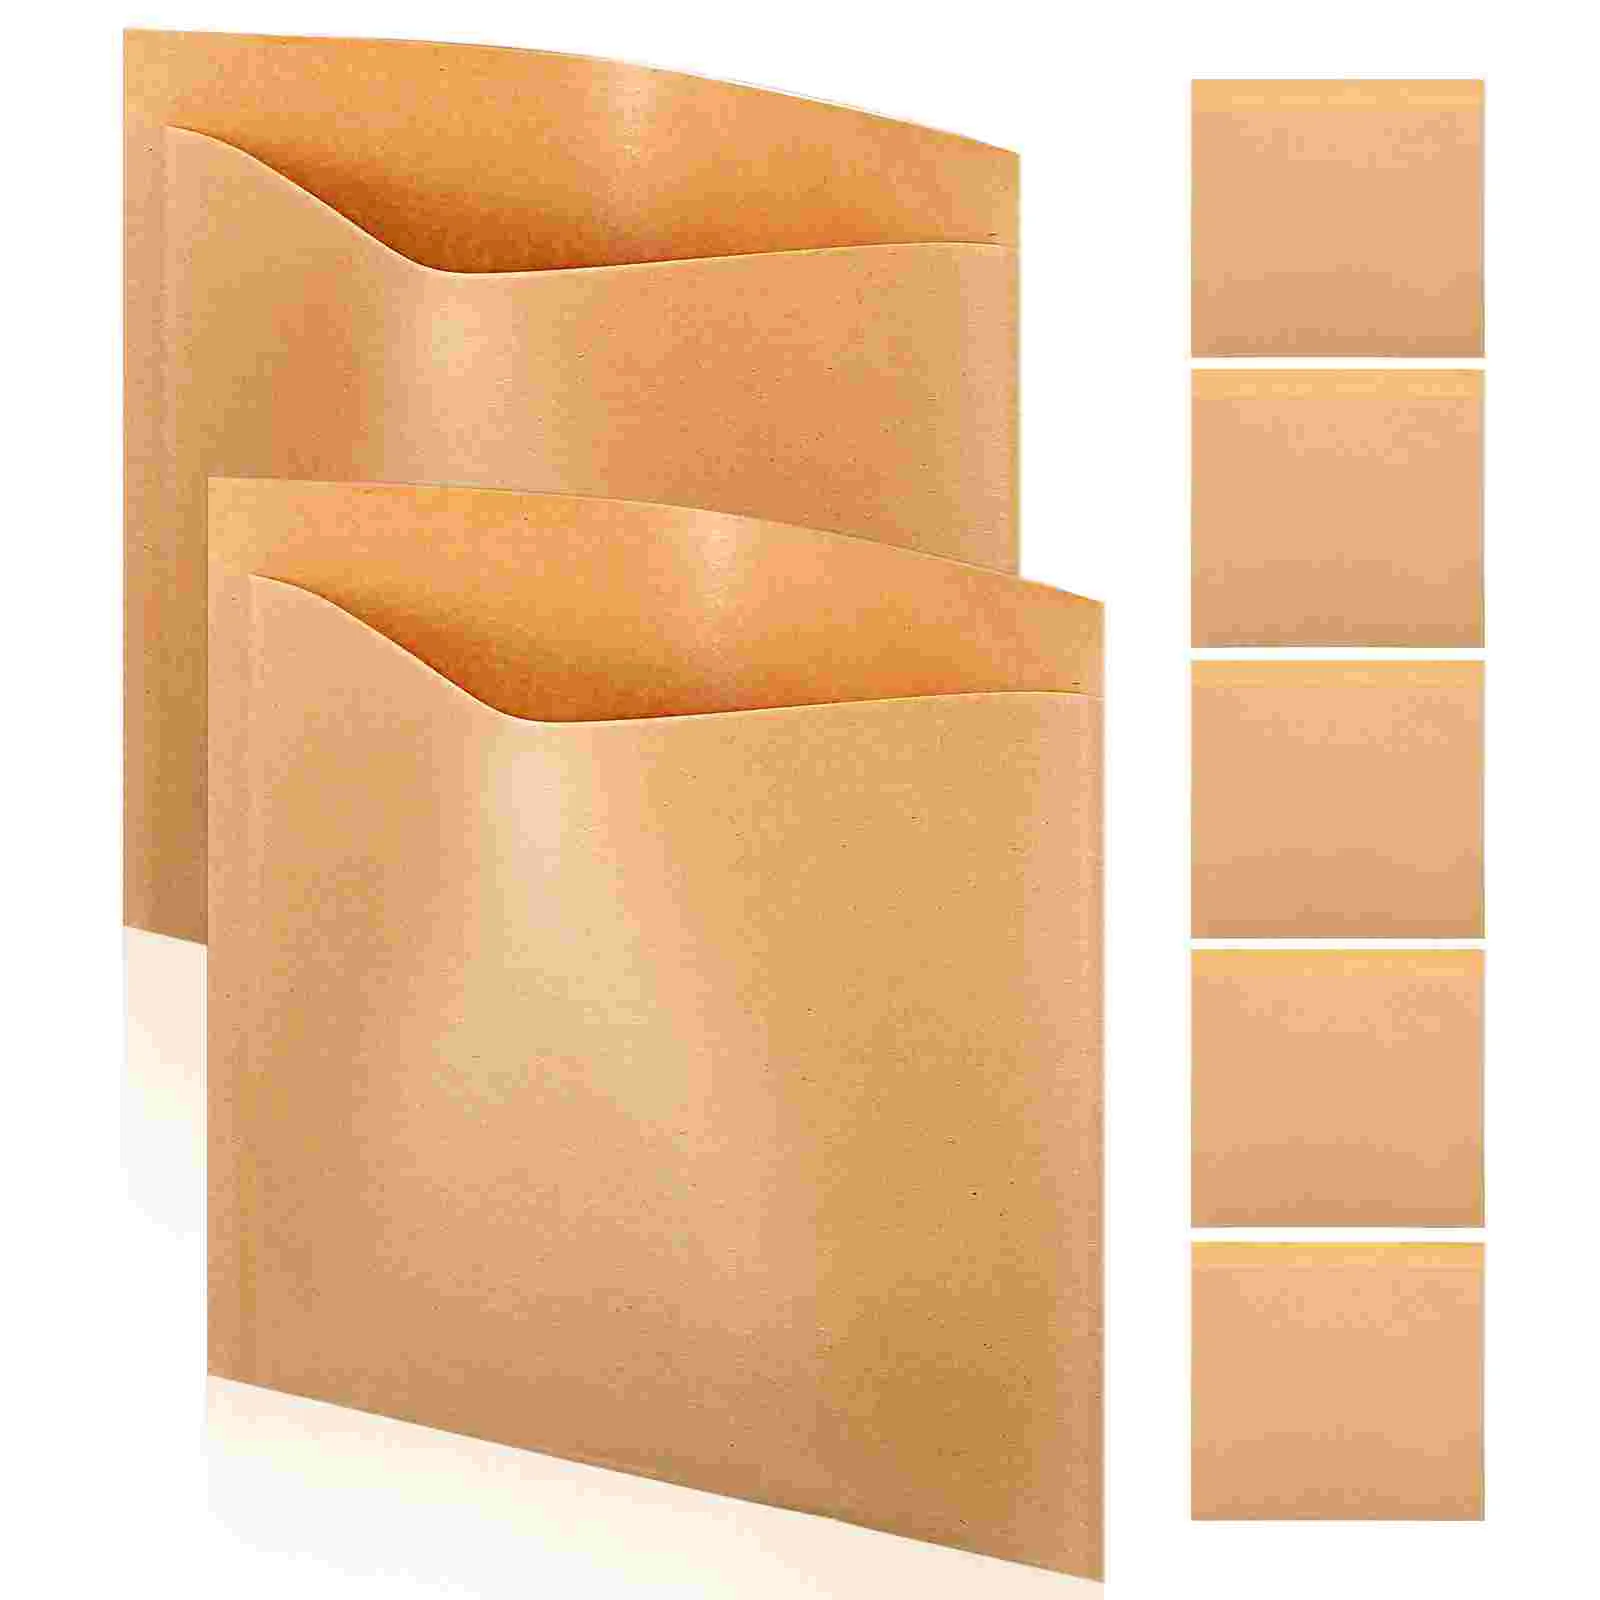 

Bags Paper Sandwich Bag Bakery Wax Kraft Cookie Grease Deli Wrap Resistant Wrapping Oil Sheets Gift Waxed Treat Proof Favorbread